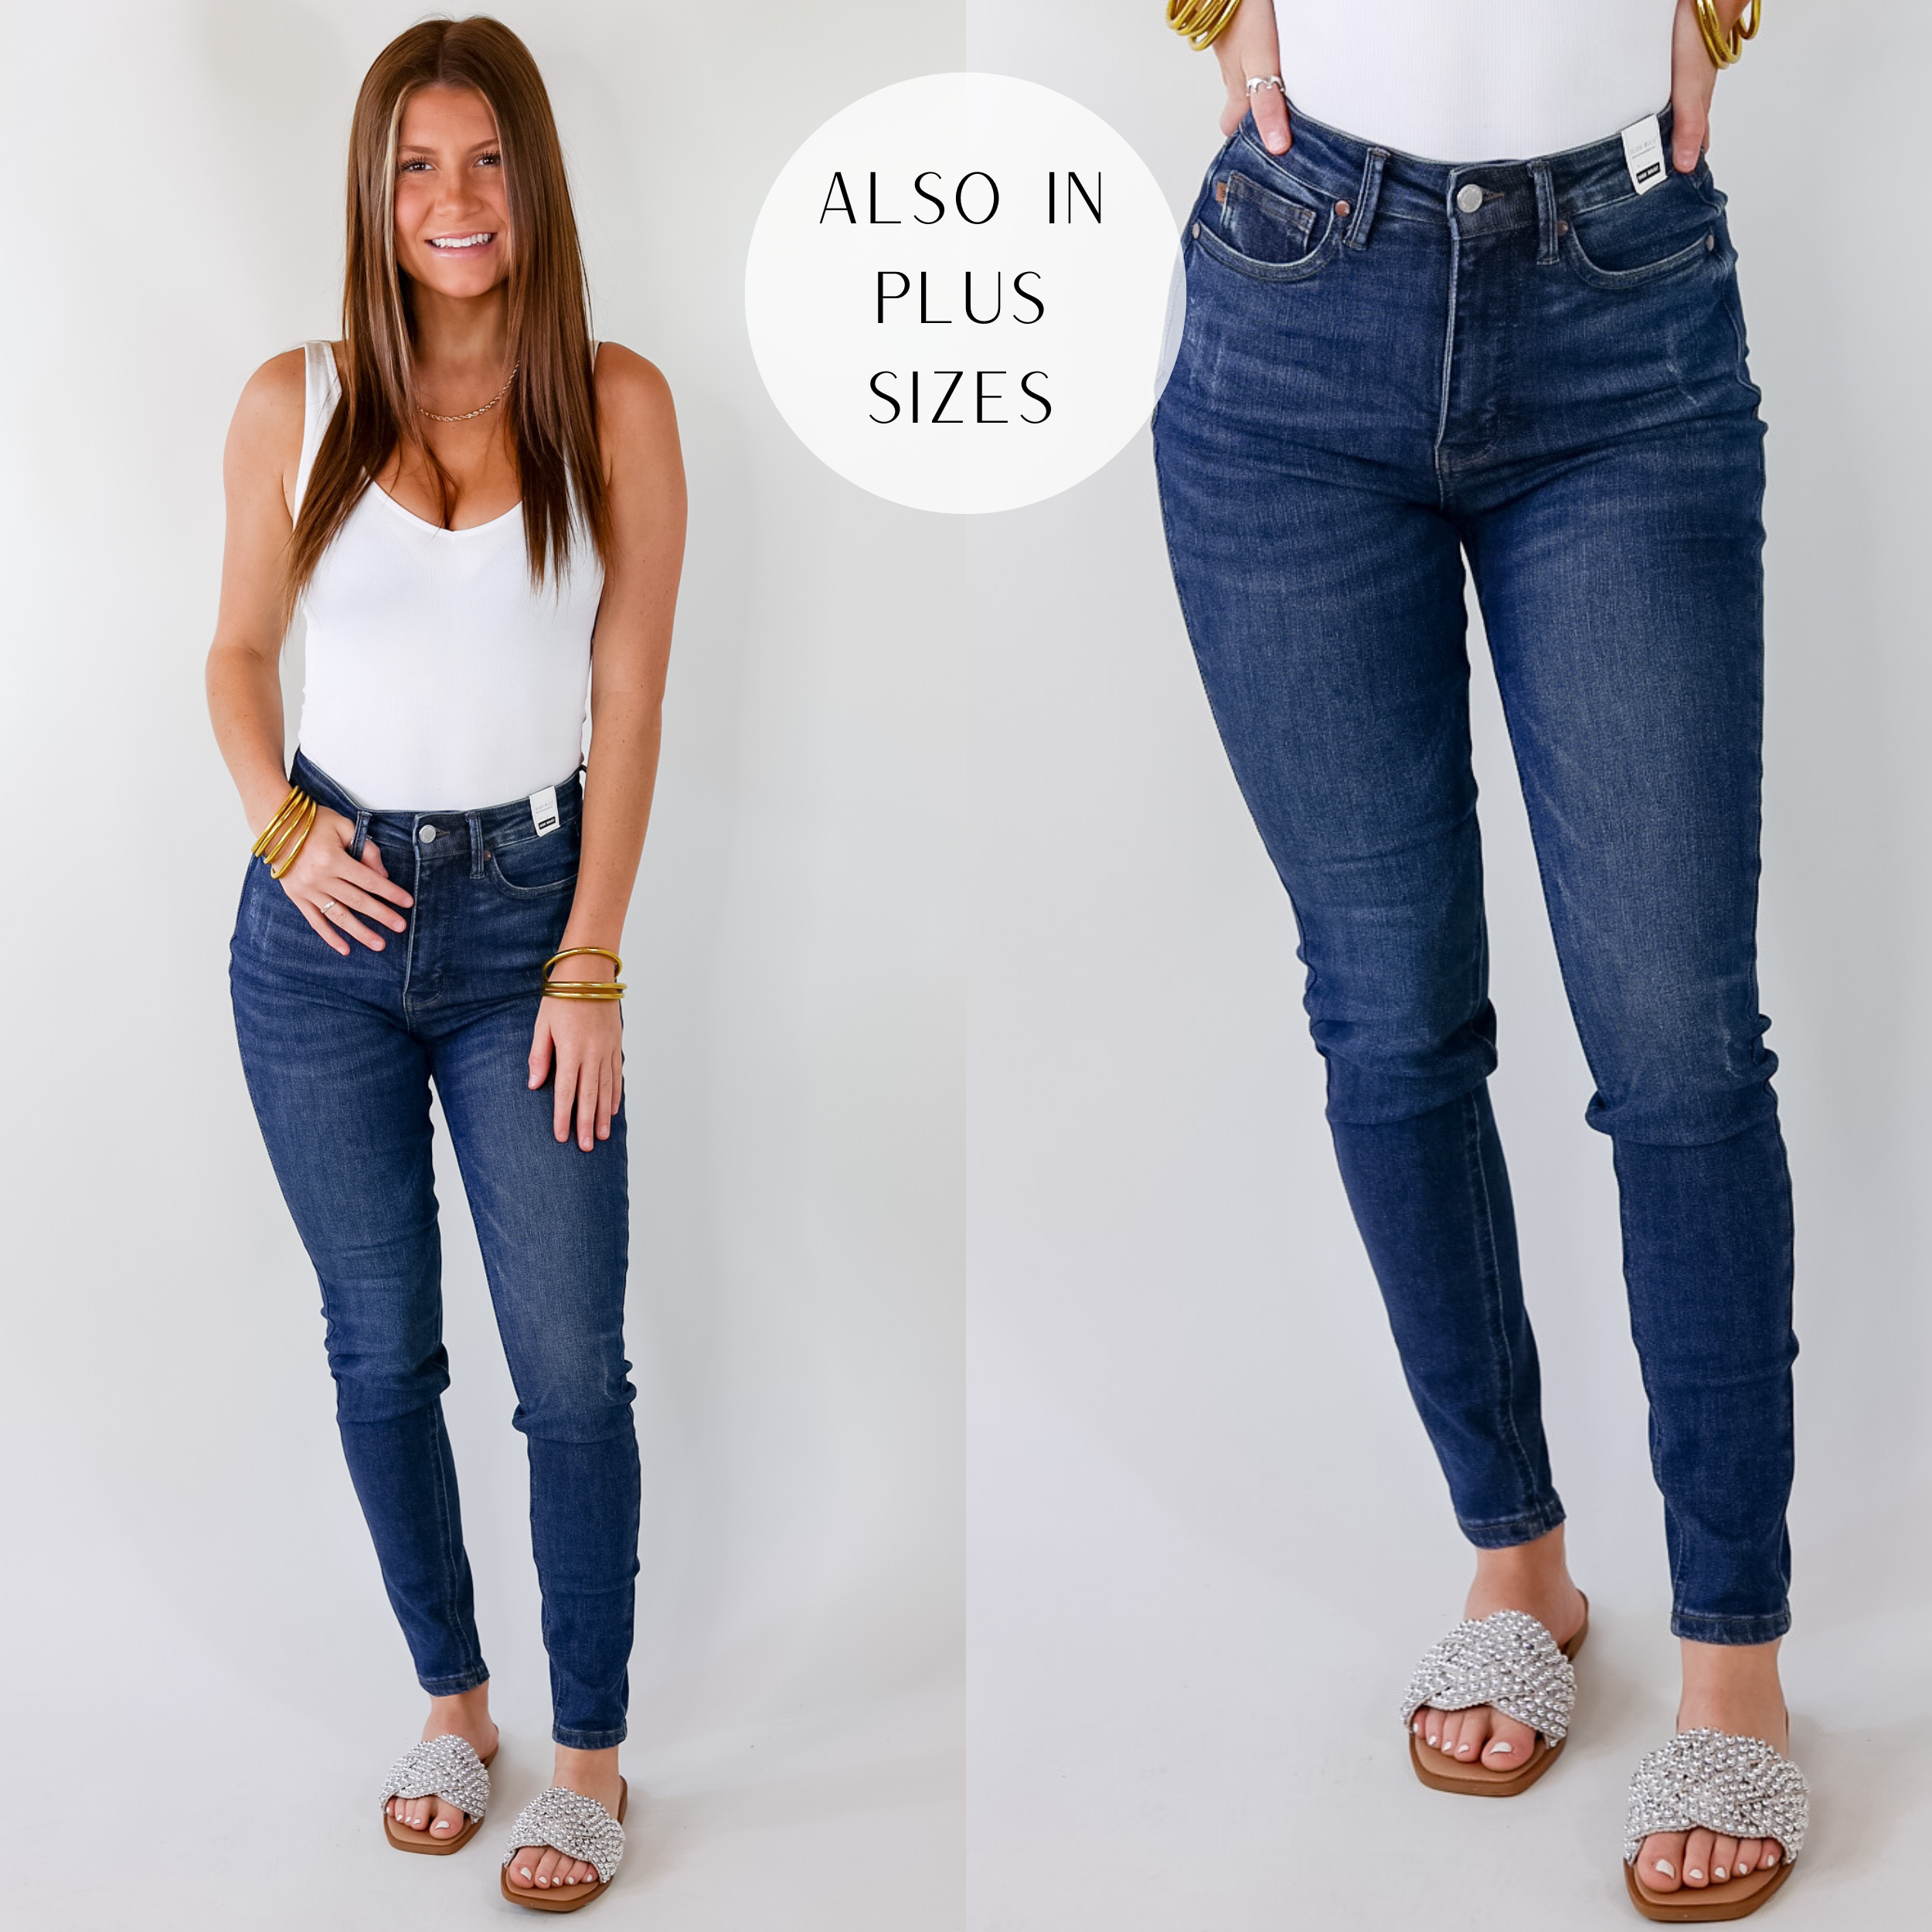 Judy Blue | Weekly Plan Control Top Skinny Jeans in Dark Wash - Giddy Up Glamour Boutique